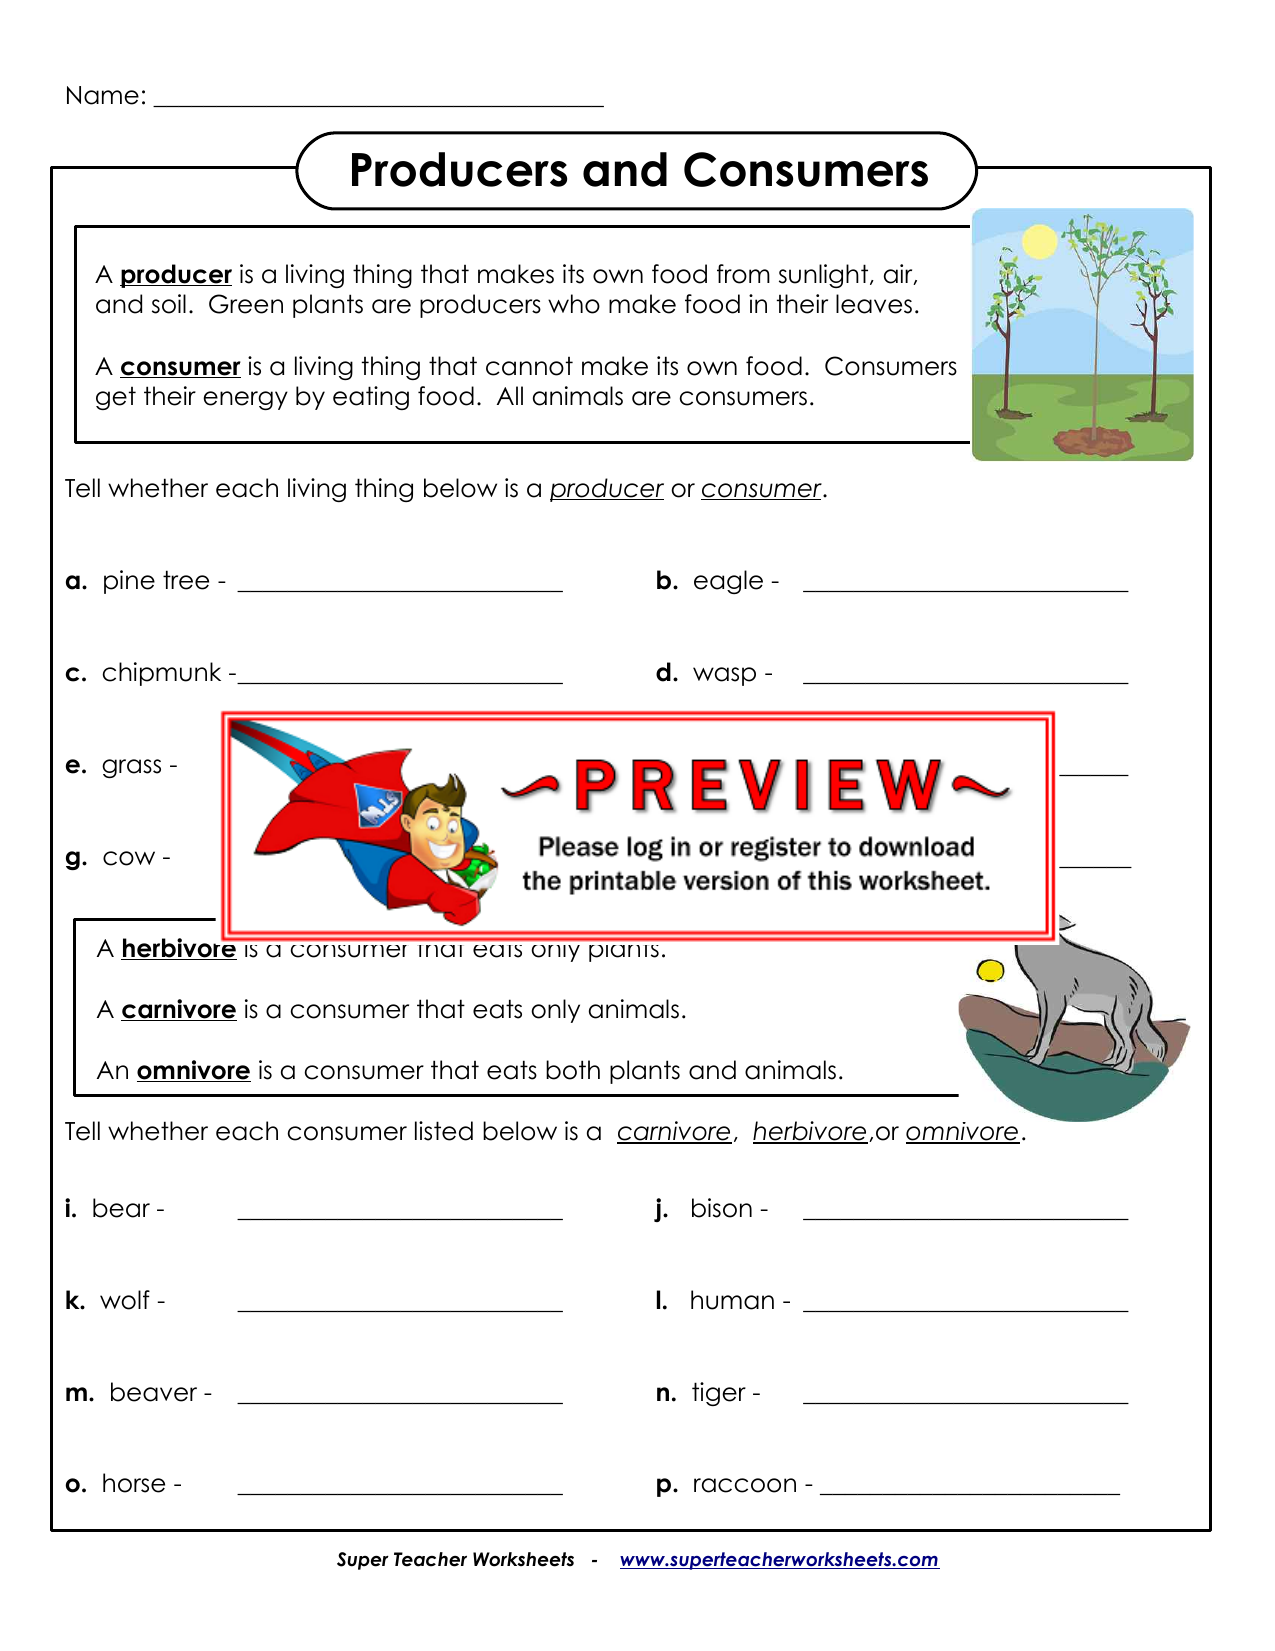 producer-consumer For Producers And Consumers Worksheet